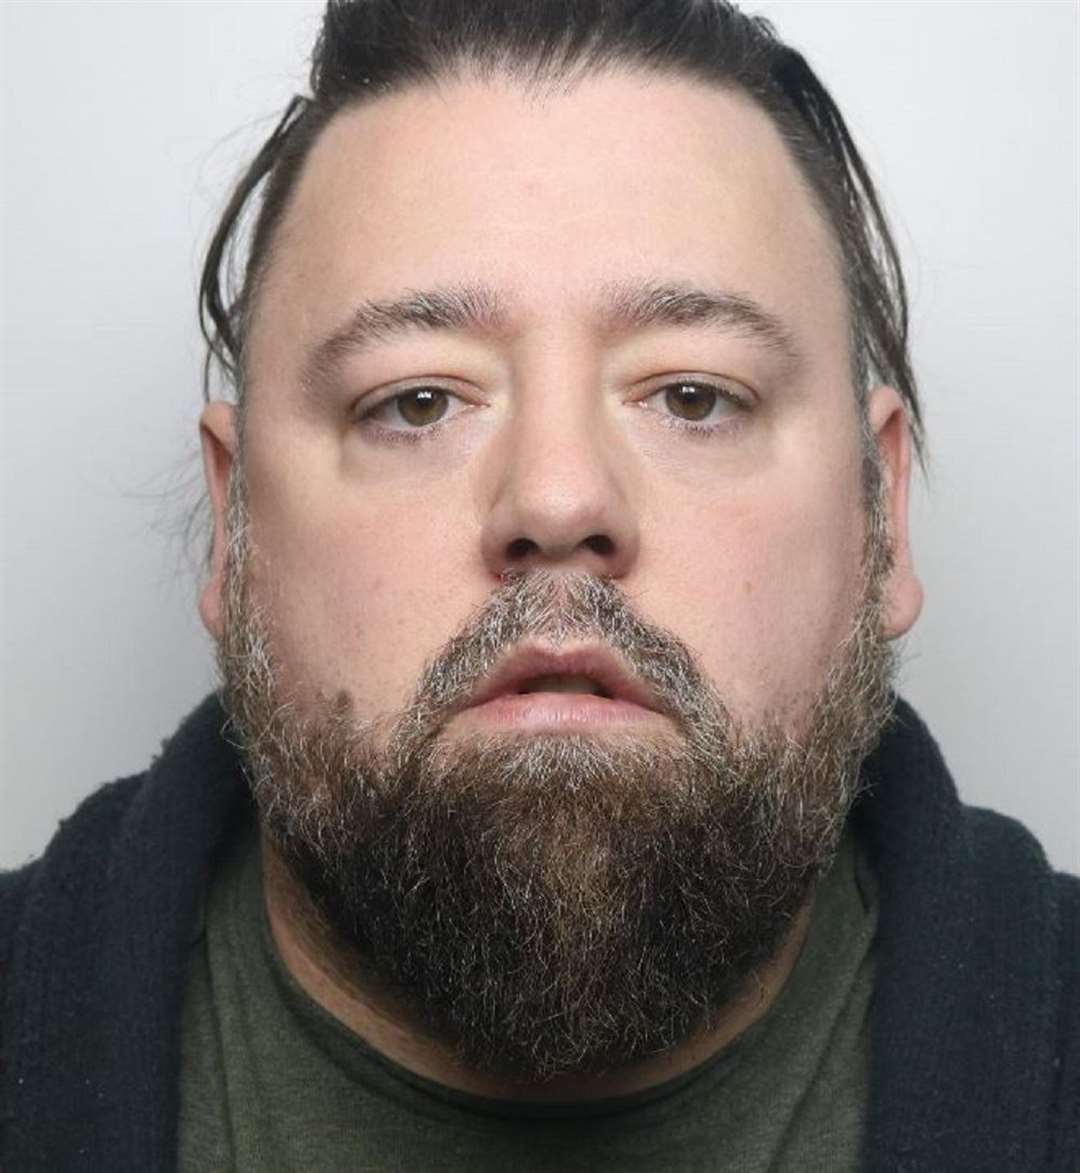 Craig Crouch was named as Jacob’s father on his birth certificate (Derbyshire Police/PA)